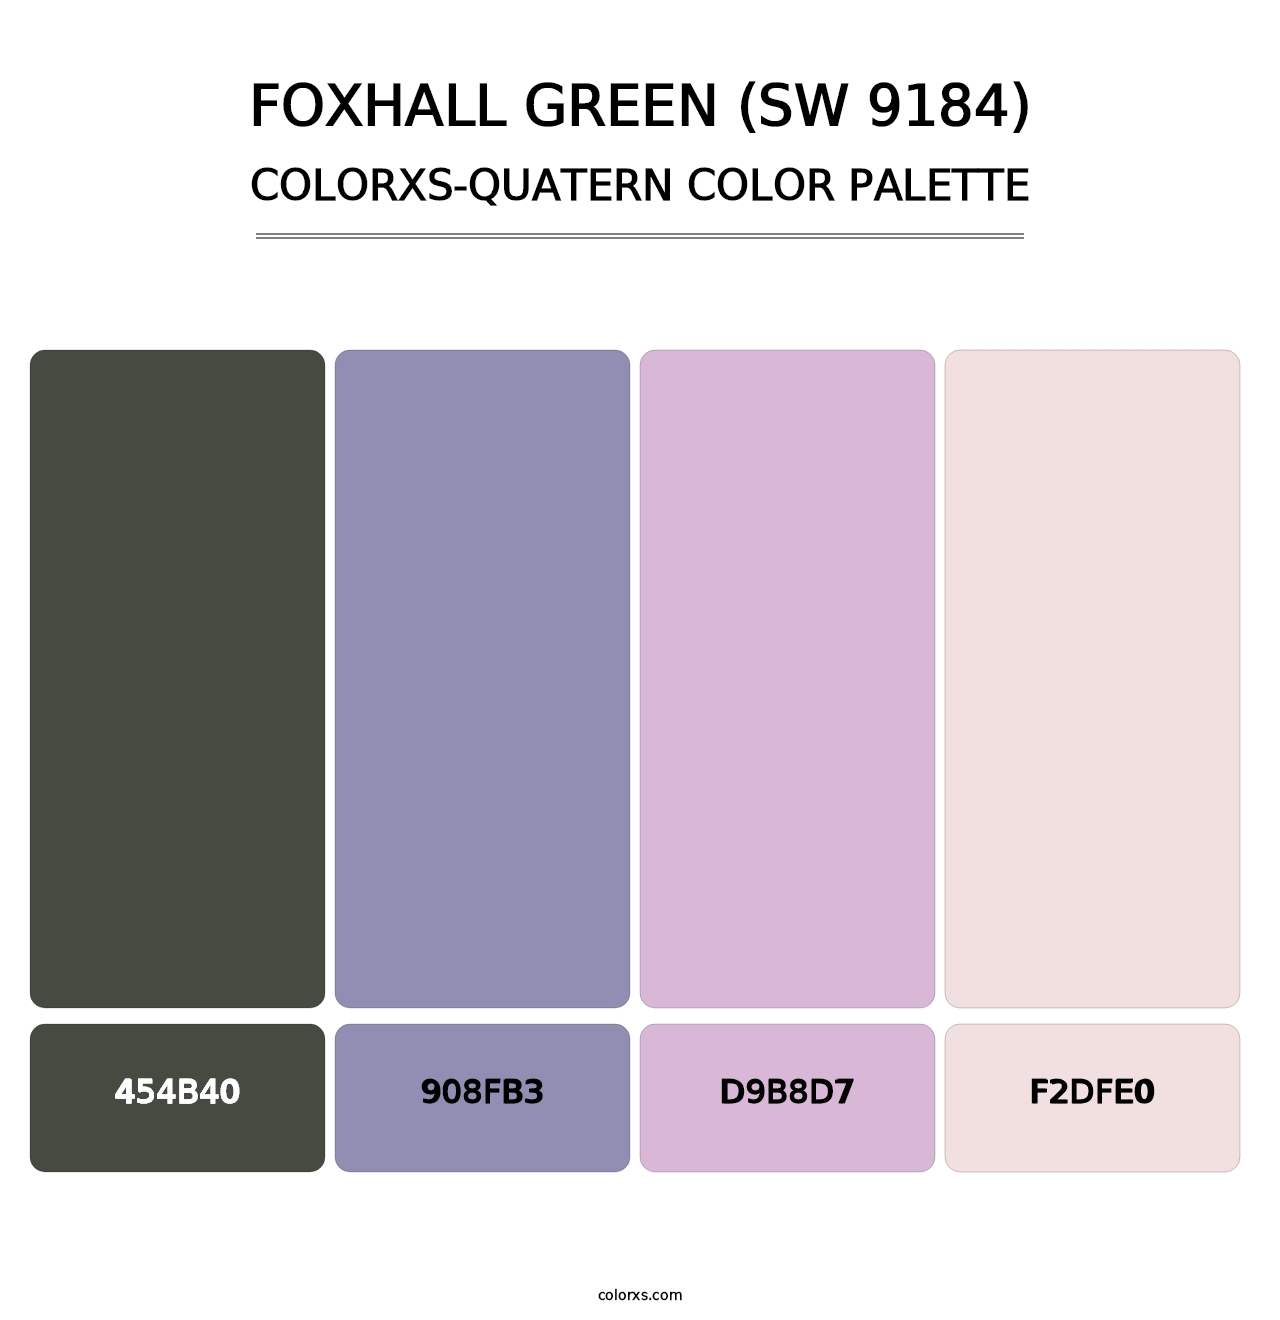 Foxhall Green (SW 9184) - Colorxs Quatern Palette